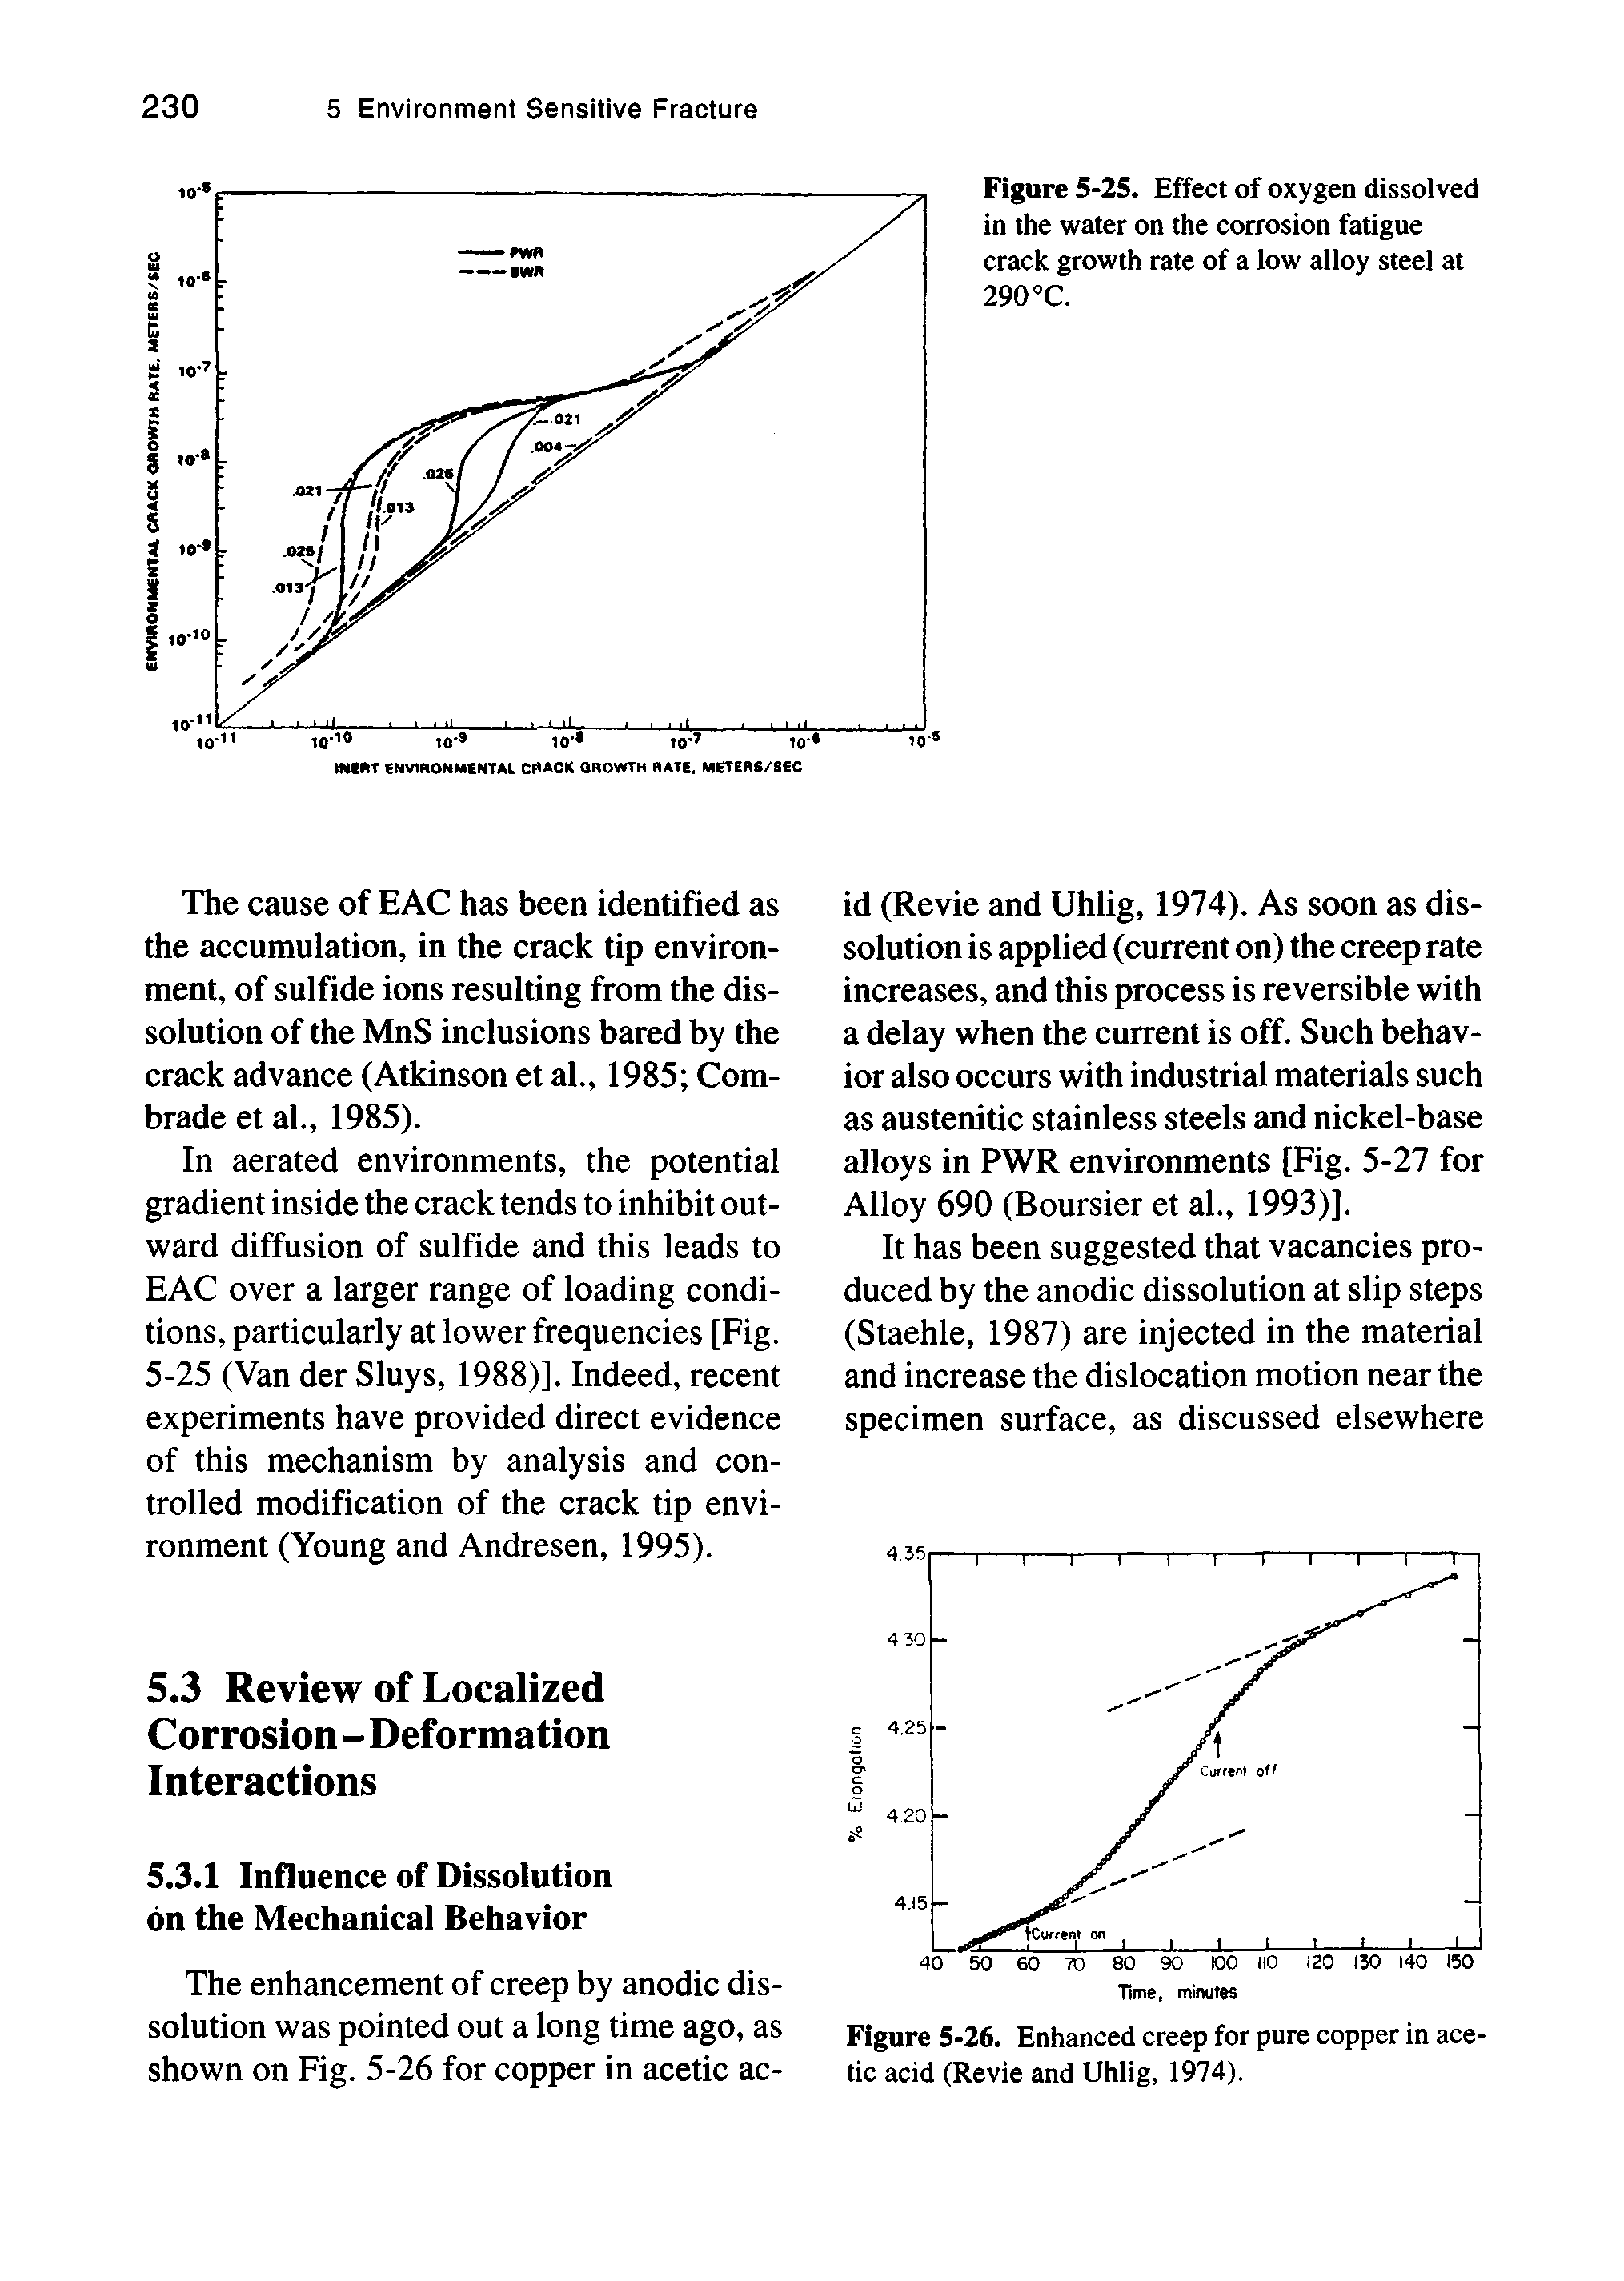 Figure 5-25. Effect of oxygen dissolved in the water on the corrosion fatigue crack growth rate of a low alloy steel at 290°C.